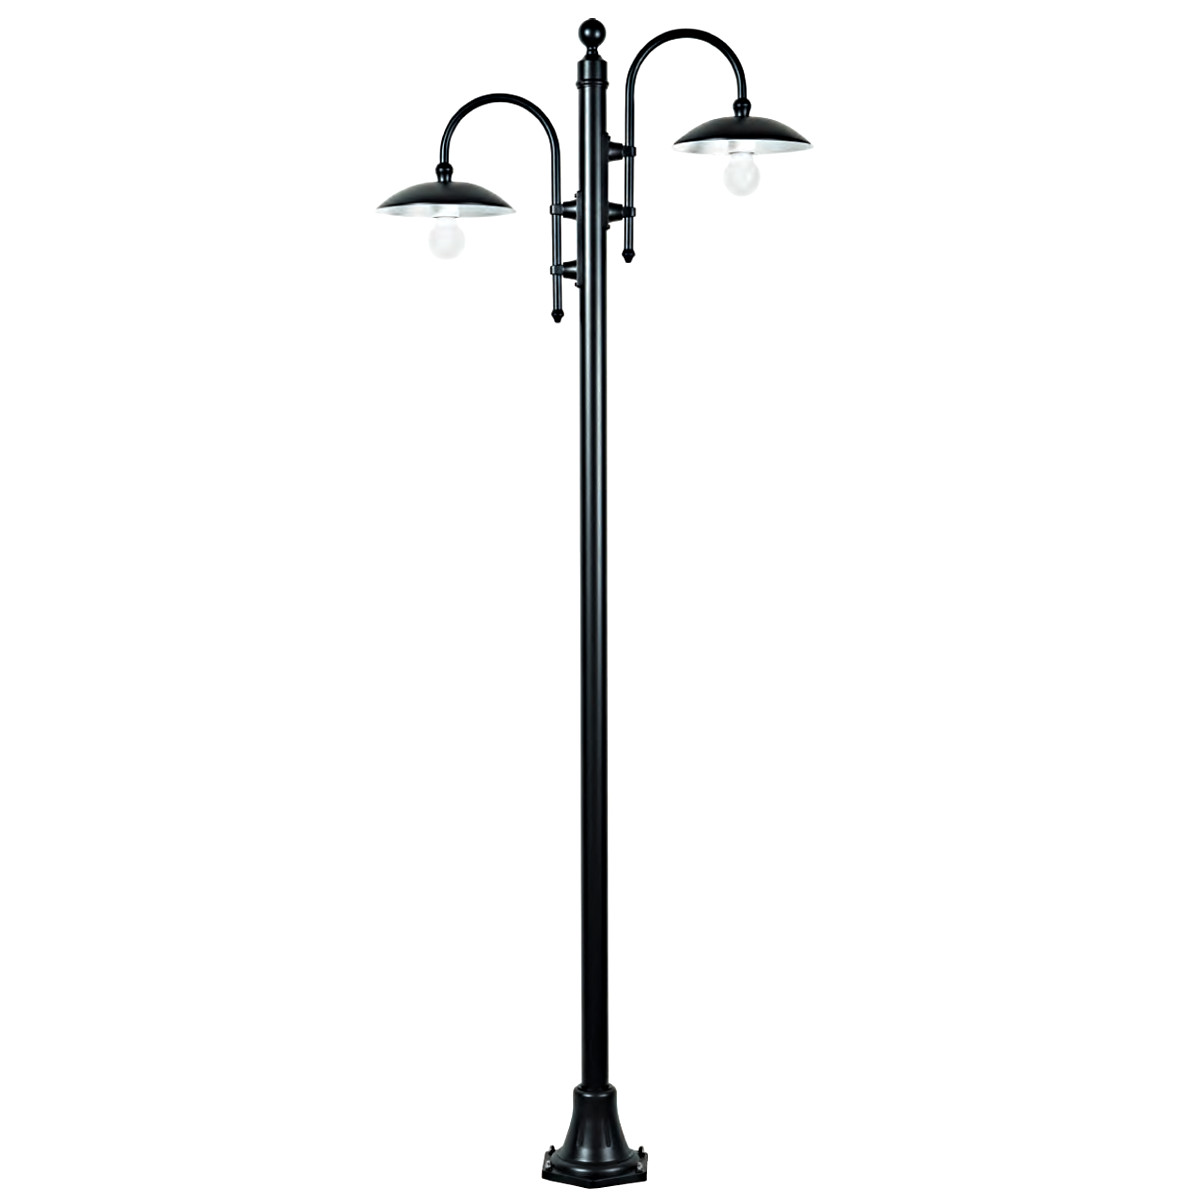 Double-flame luminaire with Sloped Bow Arms